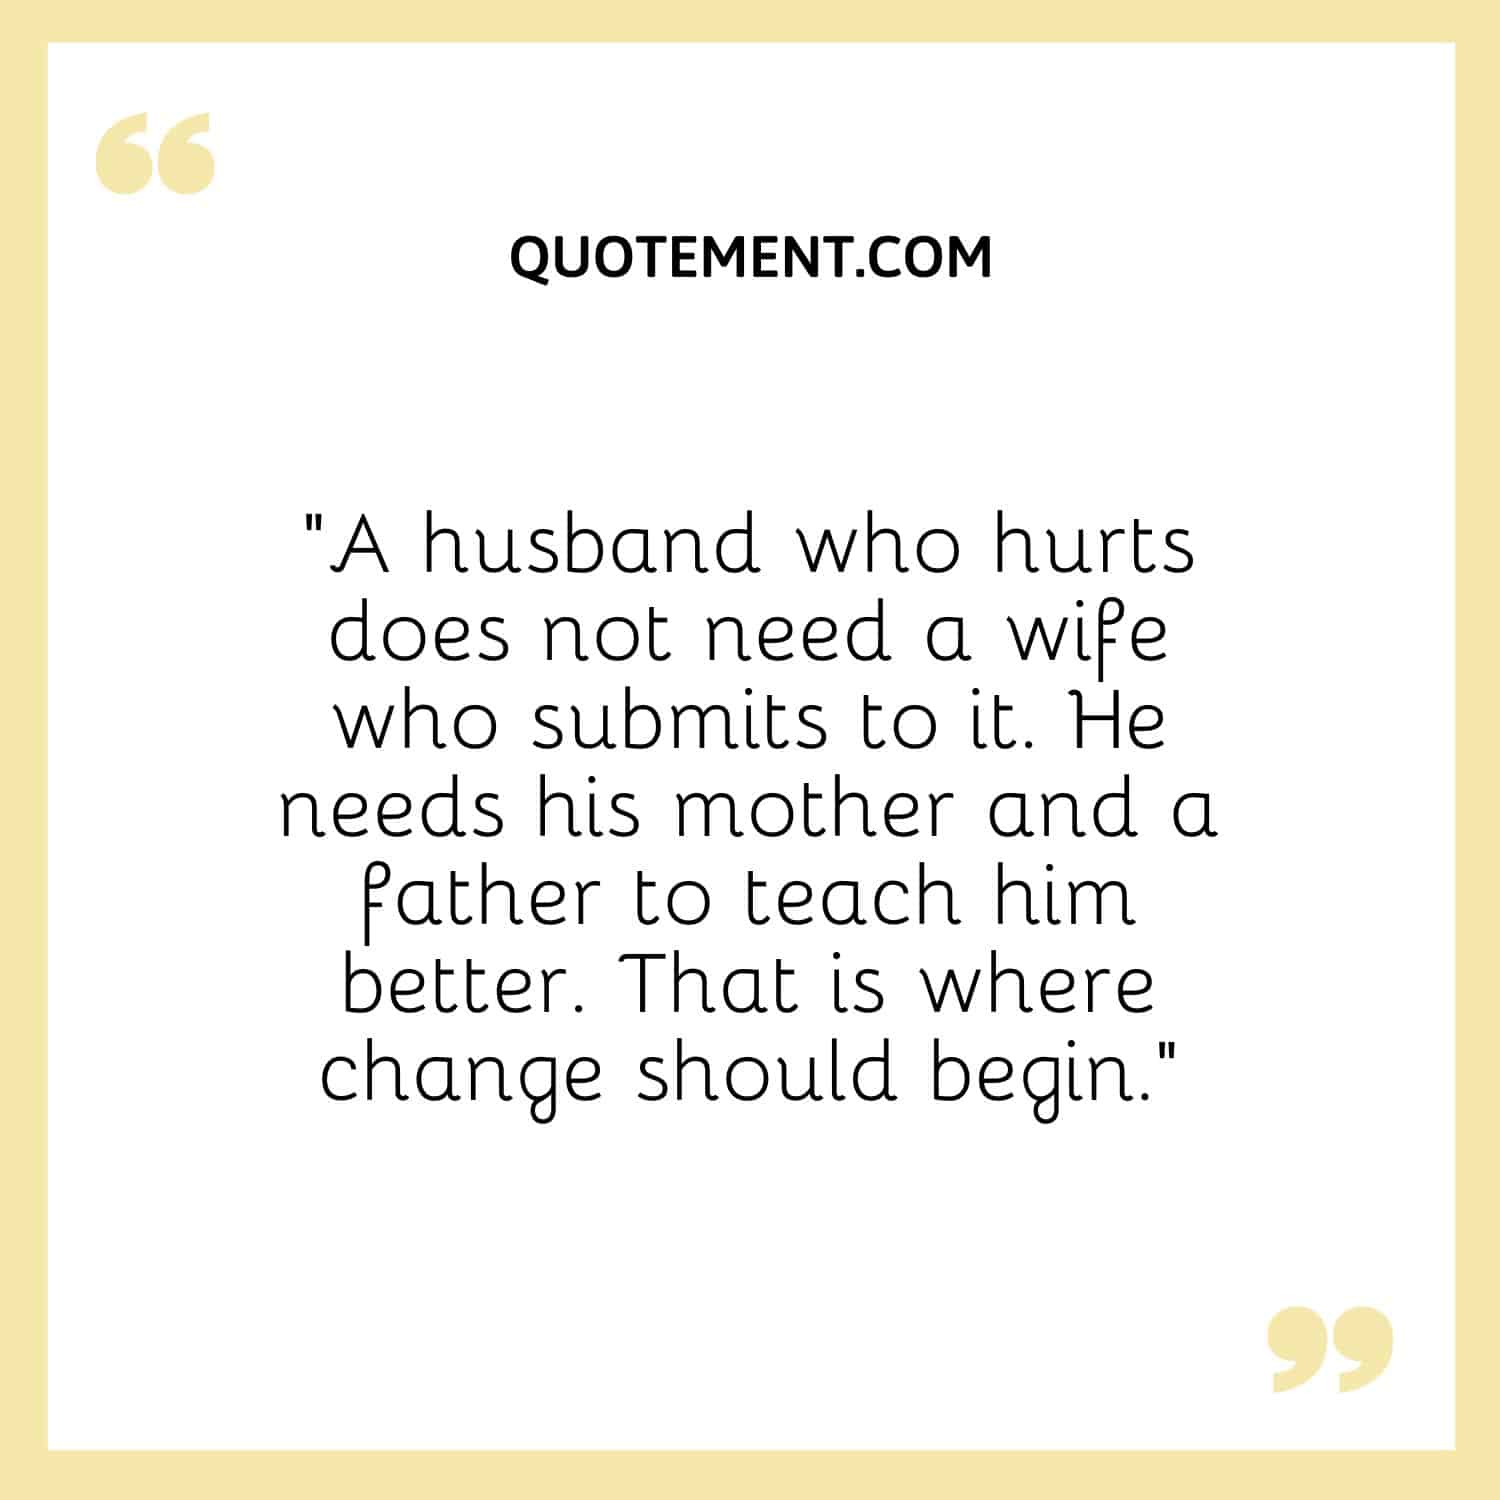 A husband who hurts does not need a wife who submits to it.